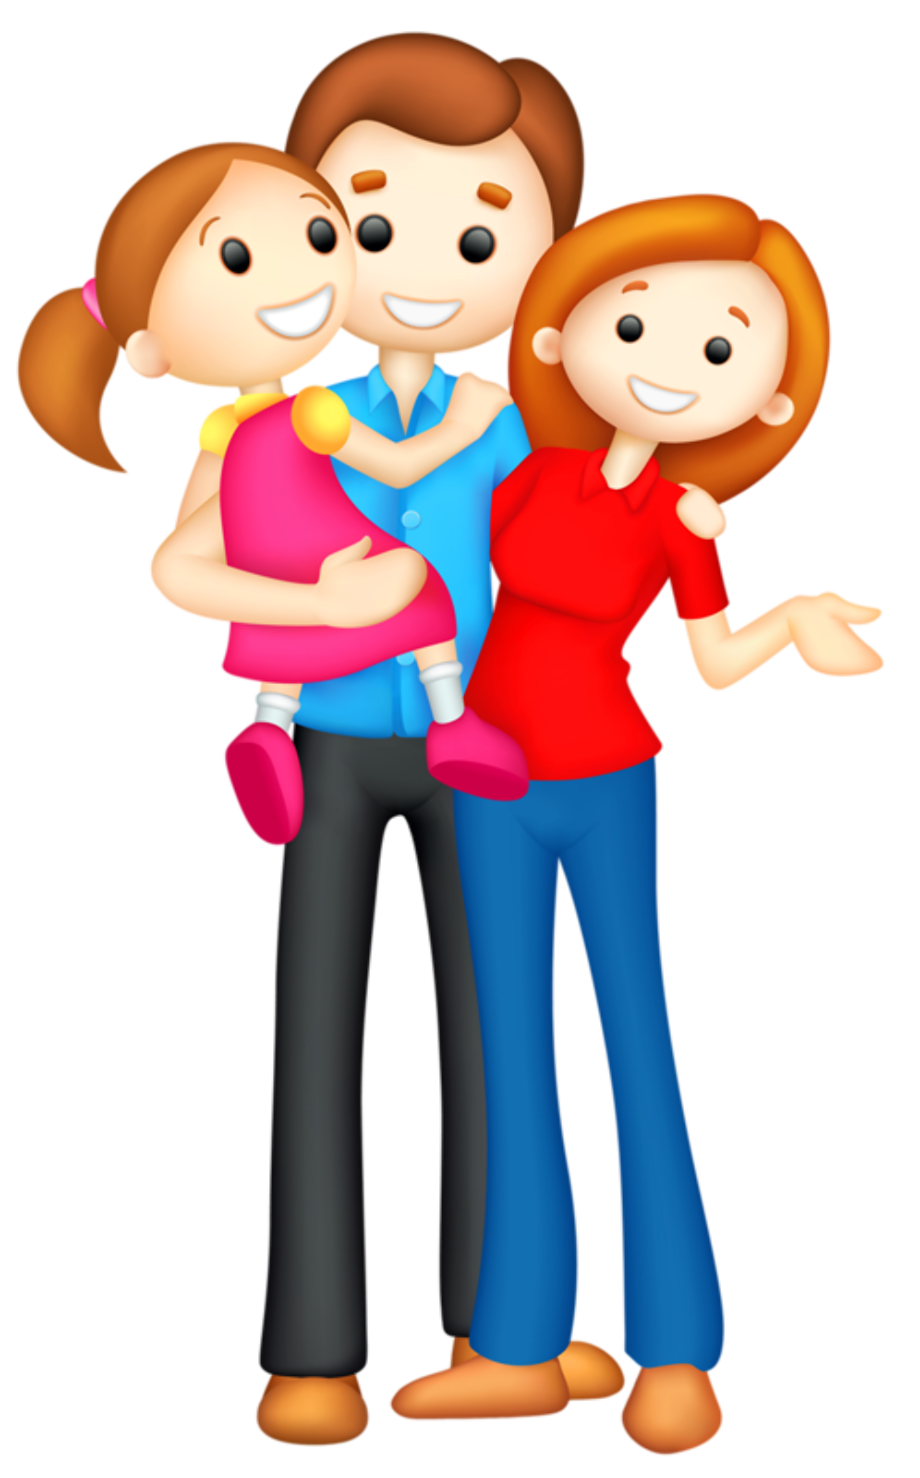 Download High Quality People clipart family Transparent PNG Images